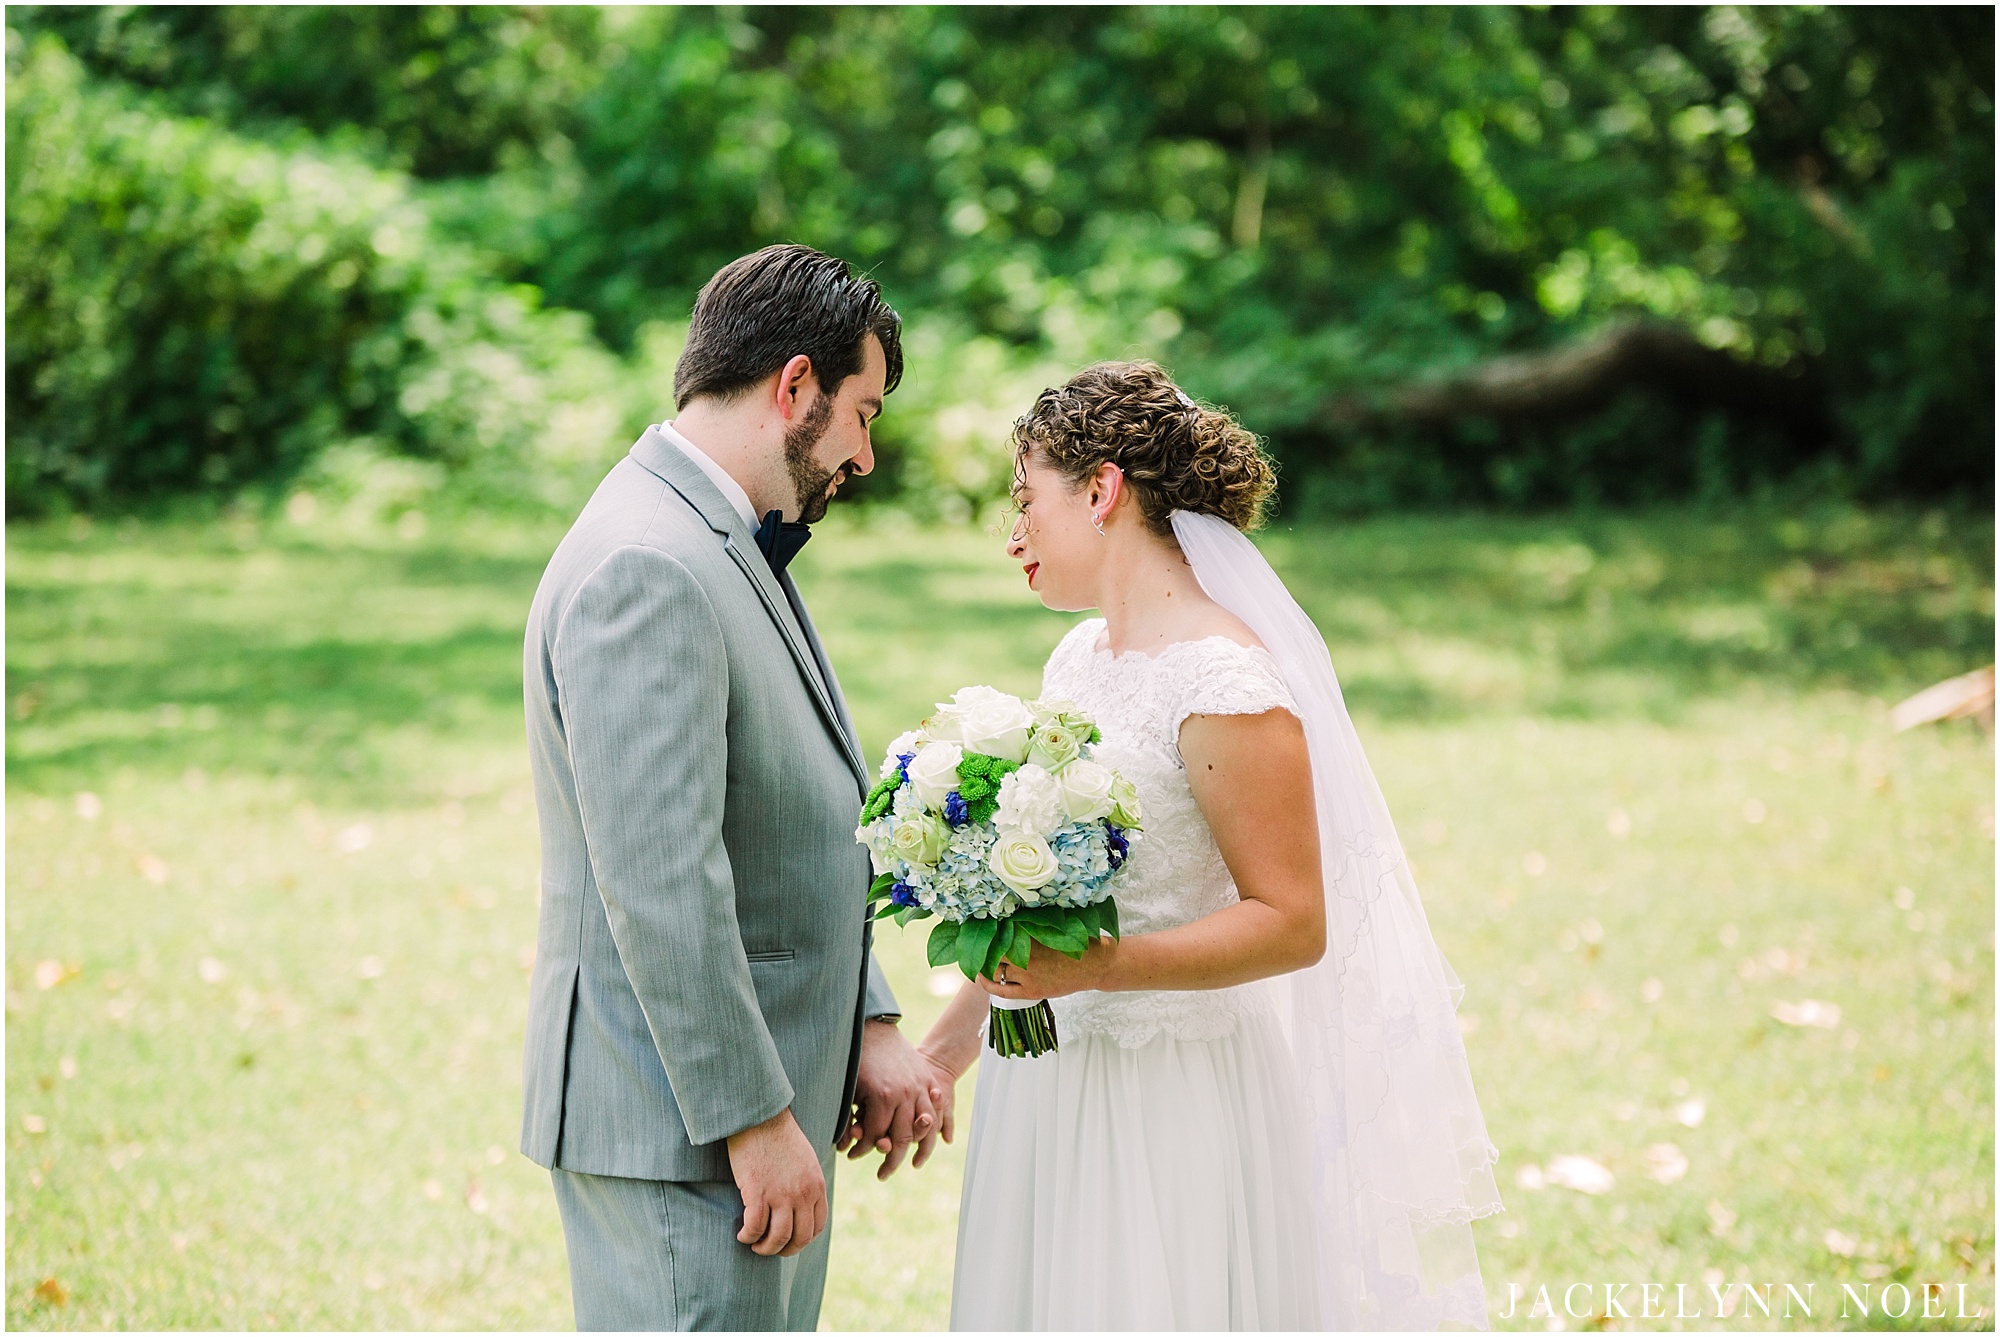 Steph and Jasper Married in St. Charles by Jackelynn Noel Photography